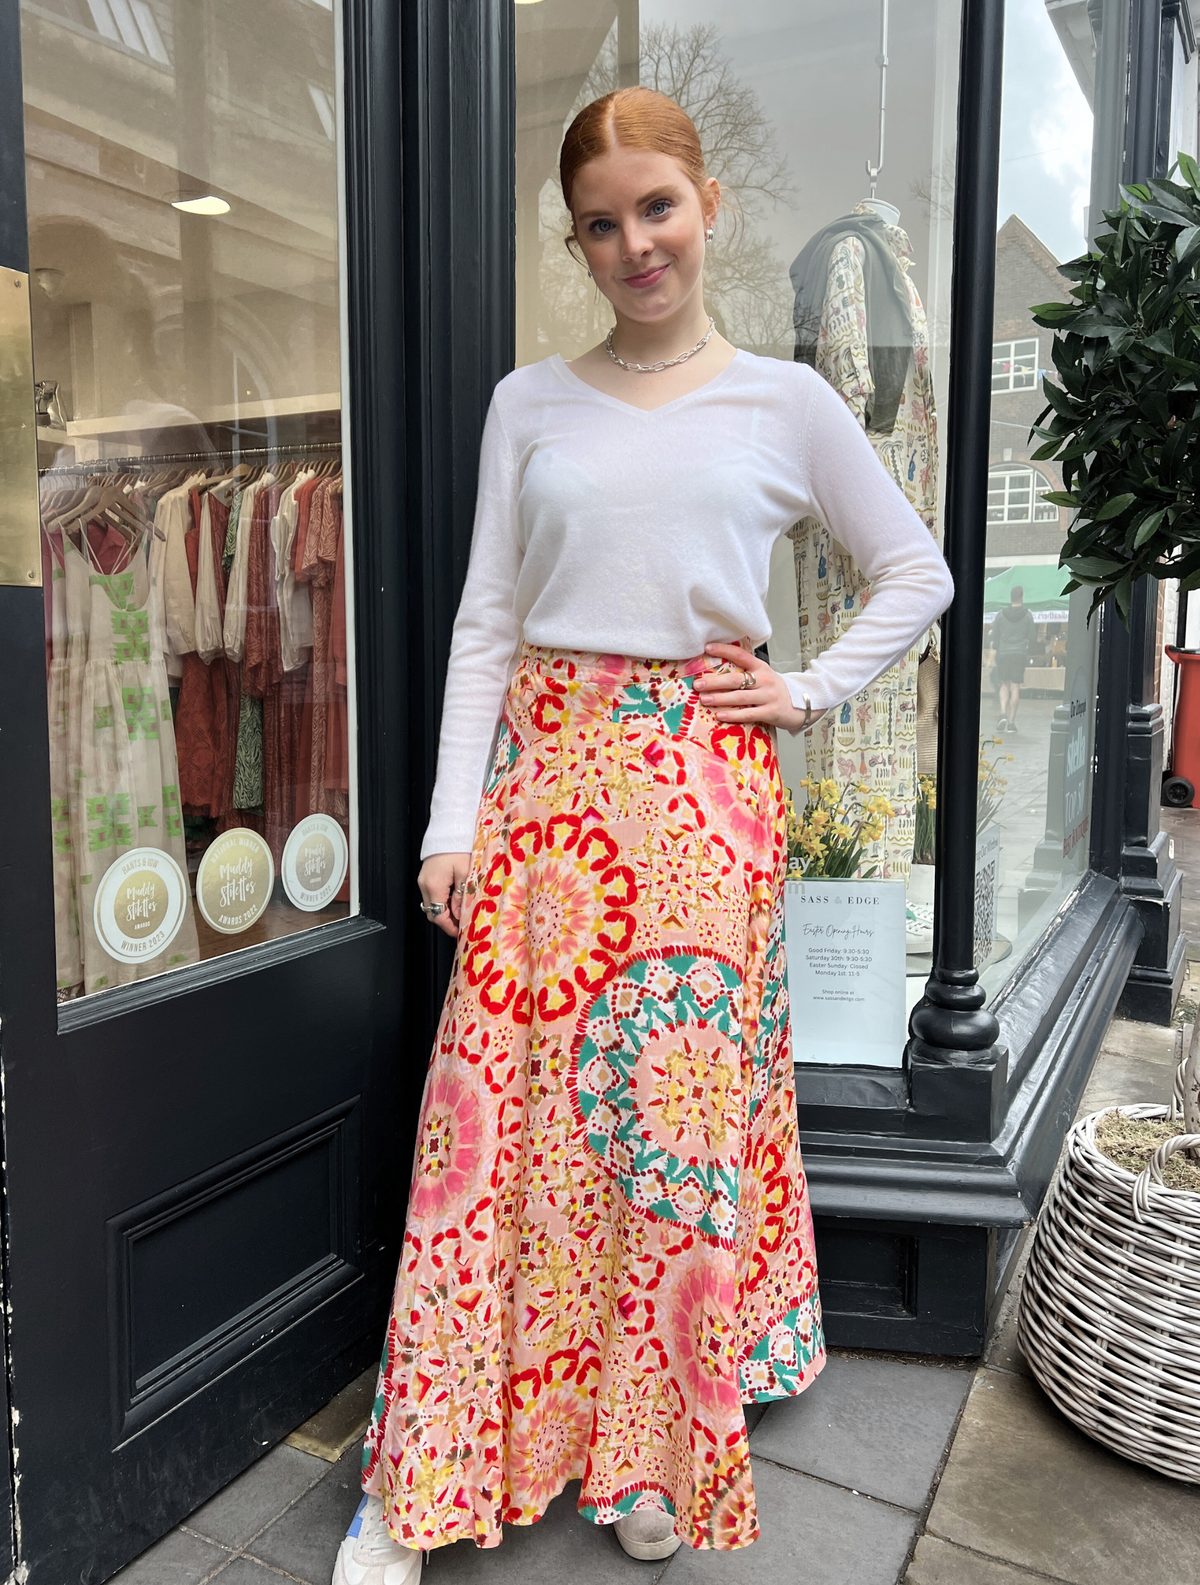 Patterned maxi skirt in tones of pink and turquoise with a shaped hem detail